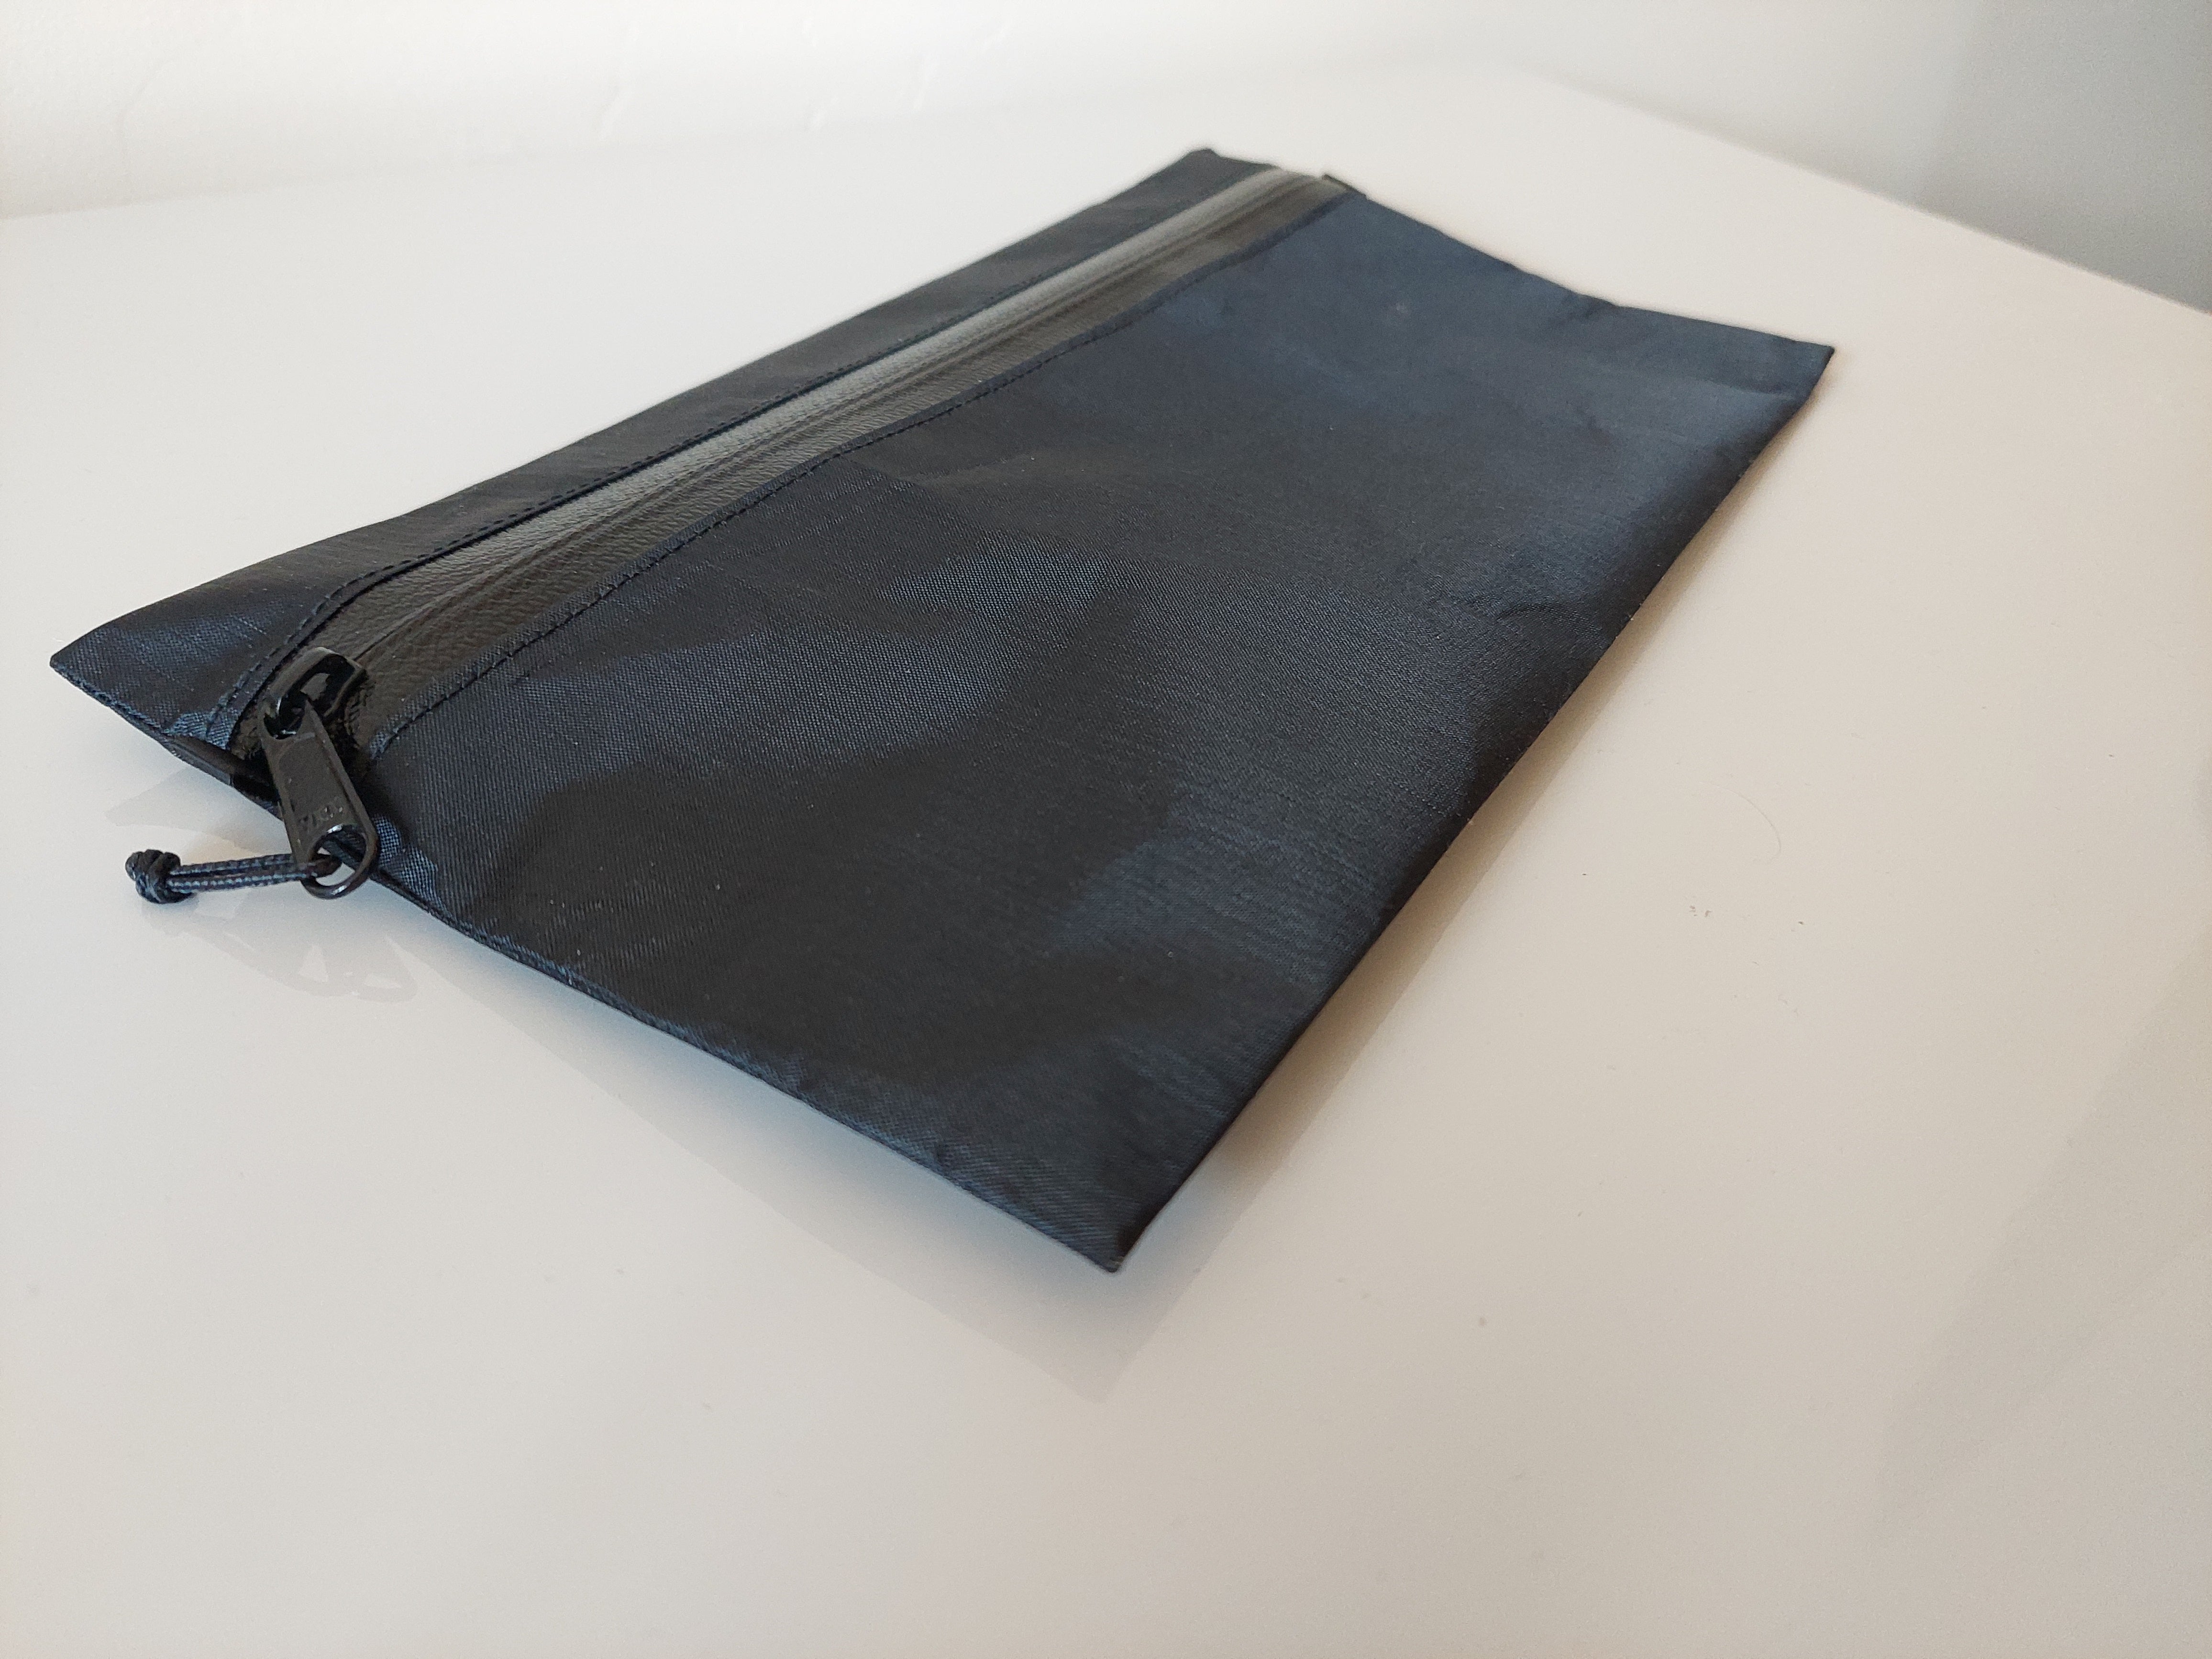 Omnicolor Solids - Zipper Pouch Kit with Dyneema® Composite Fabric